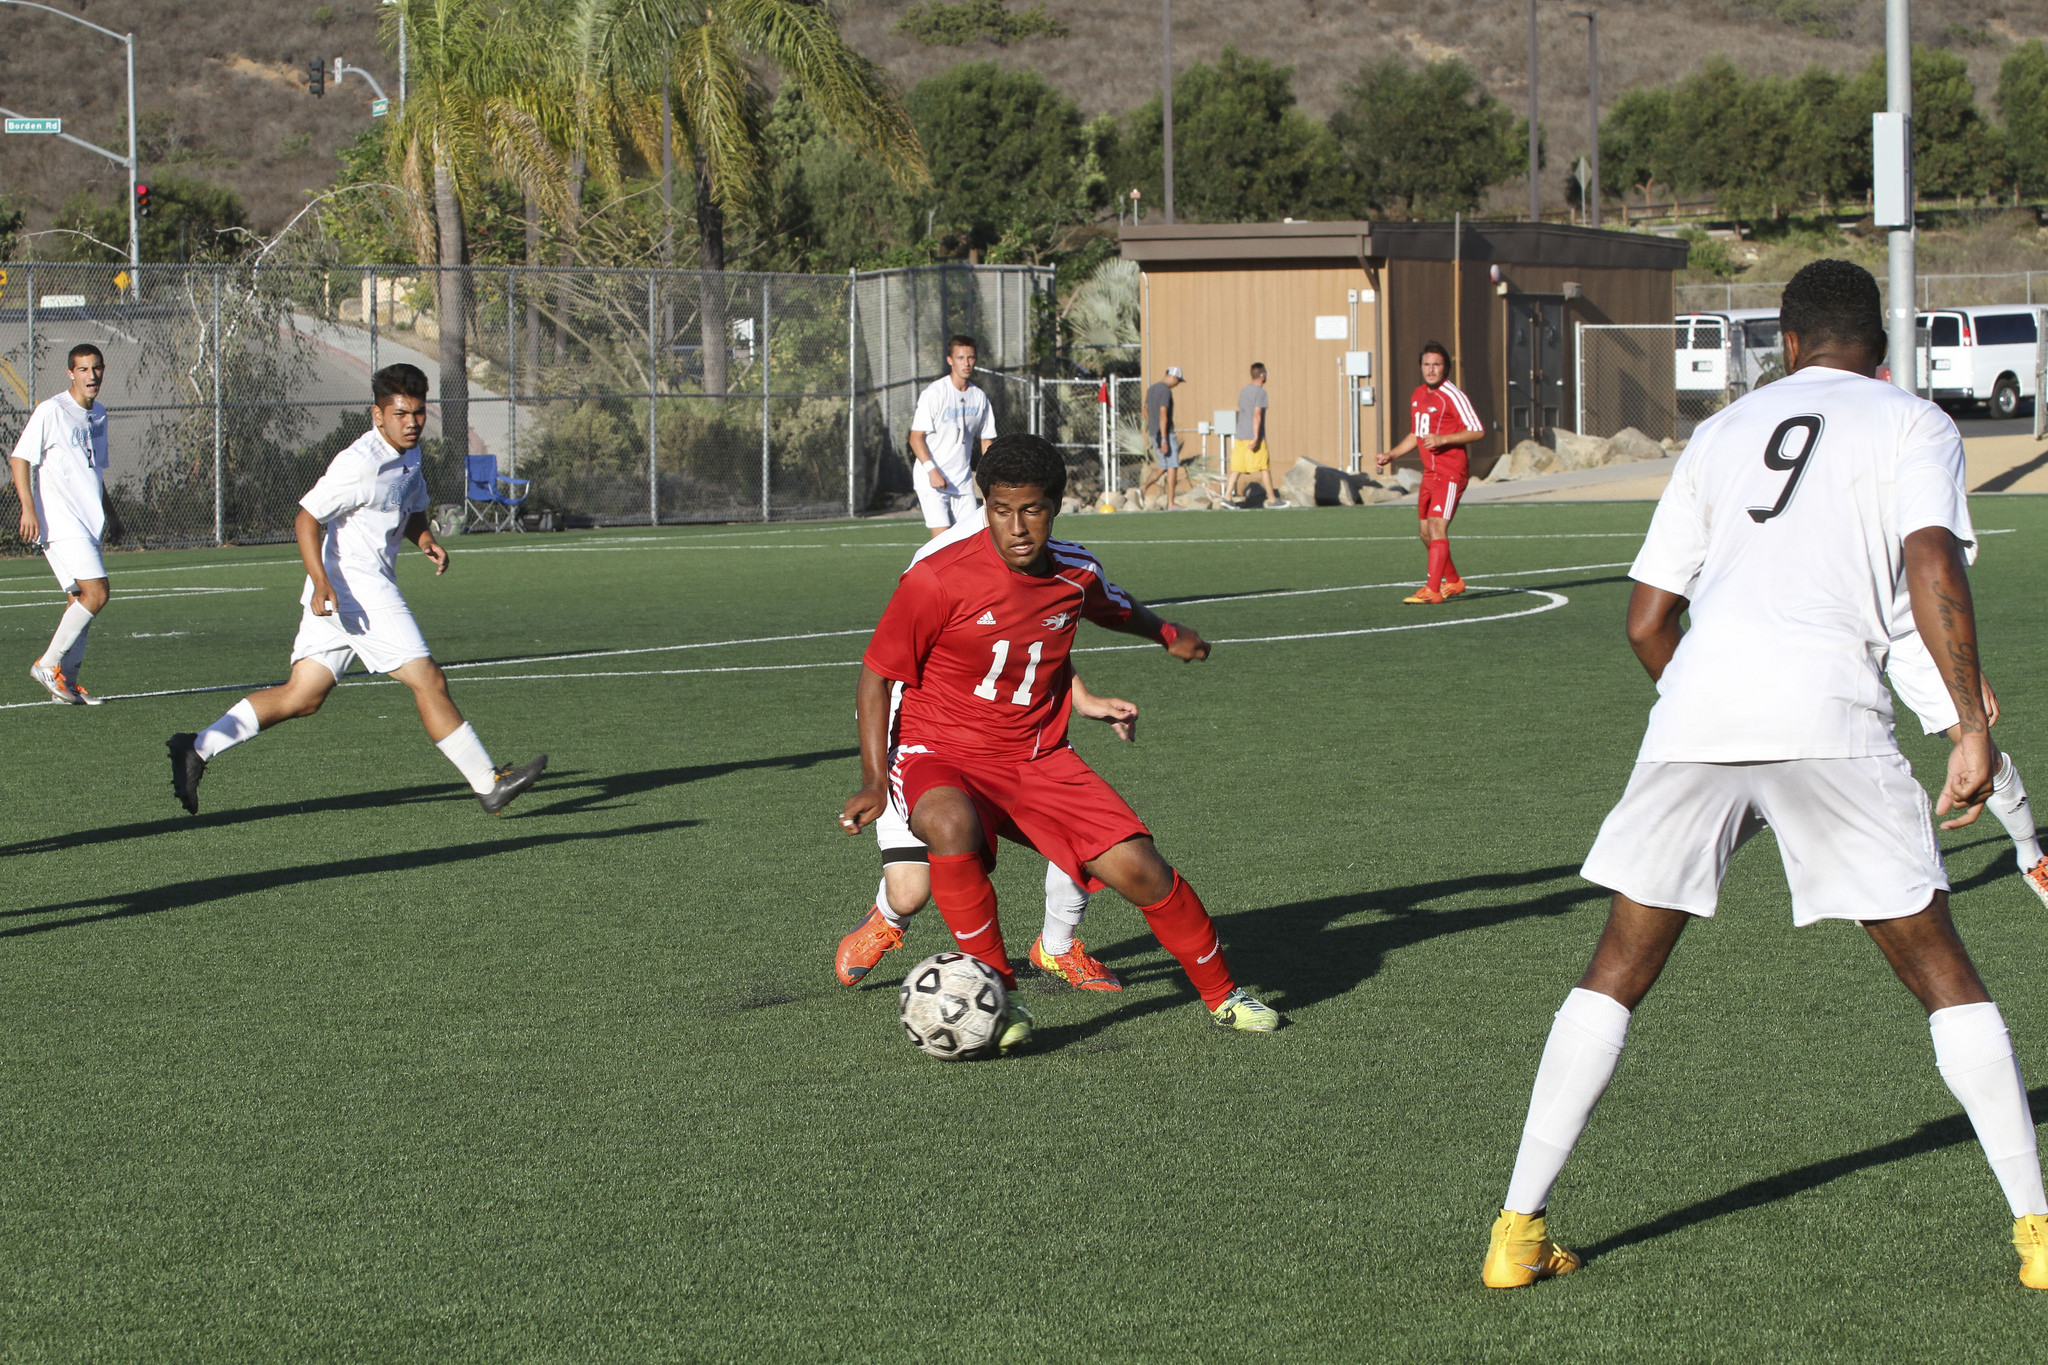 Palomar's midfielder Zack Salado (No.11) controls the ball during a game against Cuyamaca on October 24th at Minkoff Field San Marcos, California. Comet's 2-0 loss to Cuyamaca.